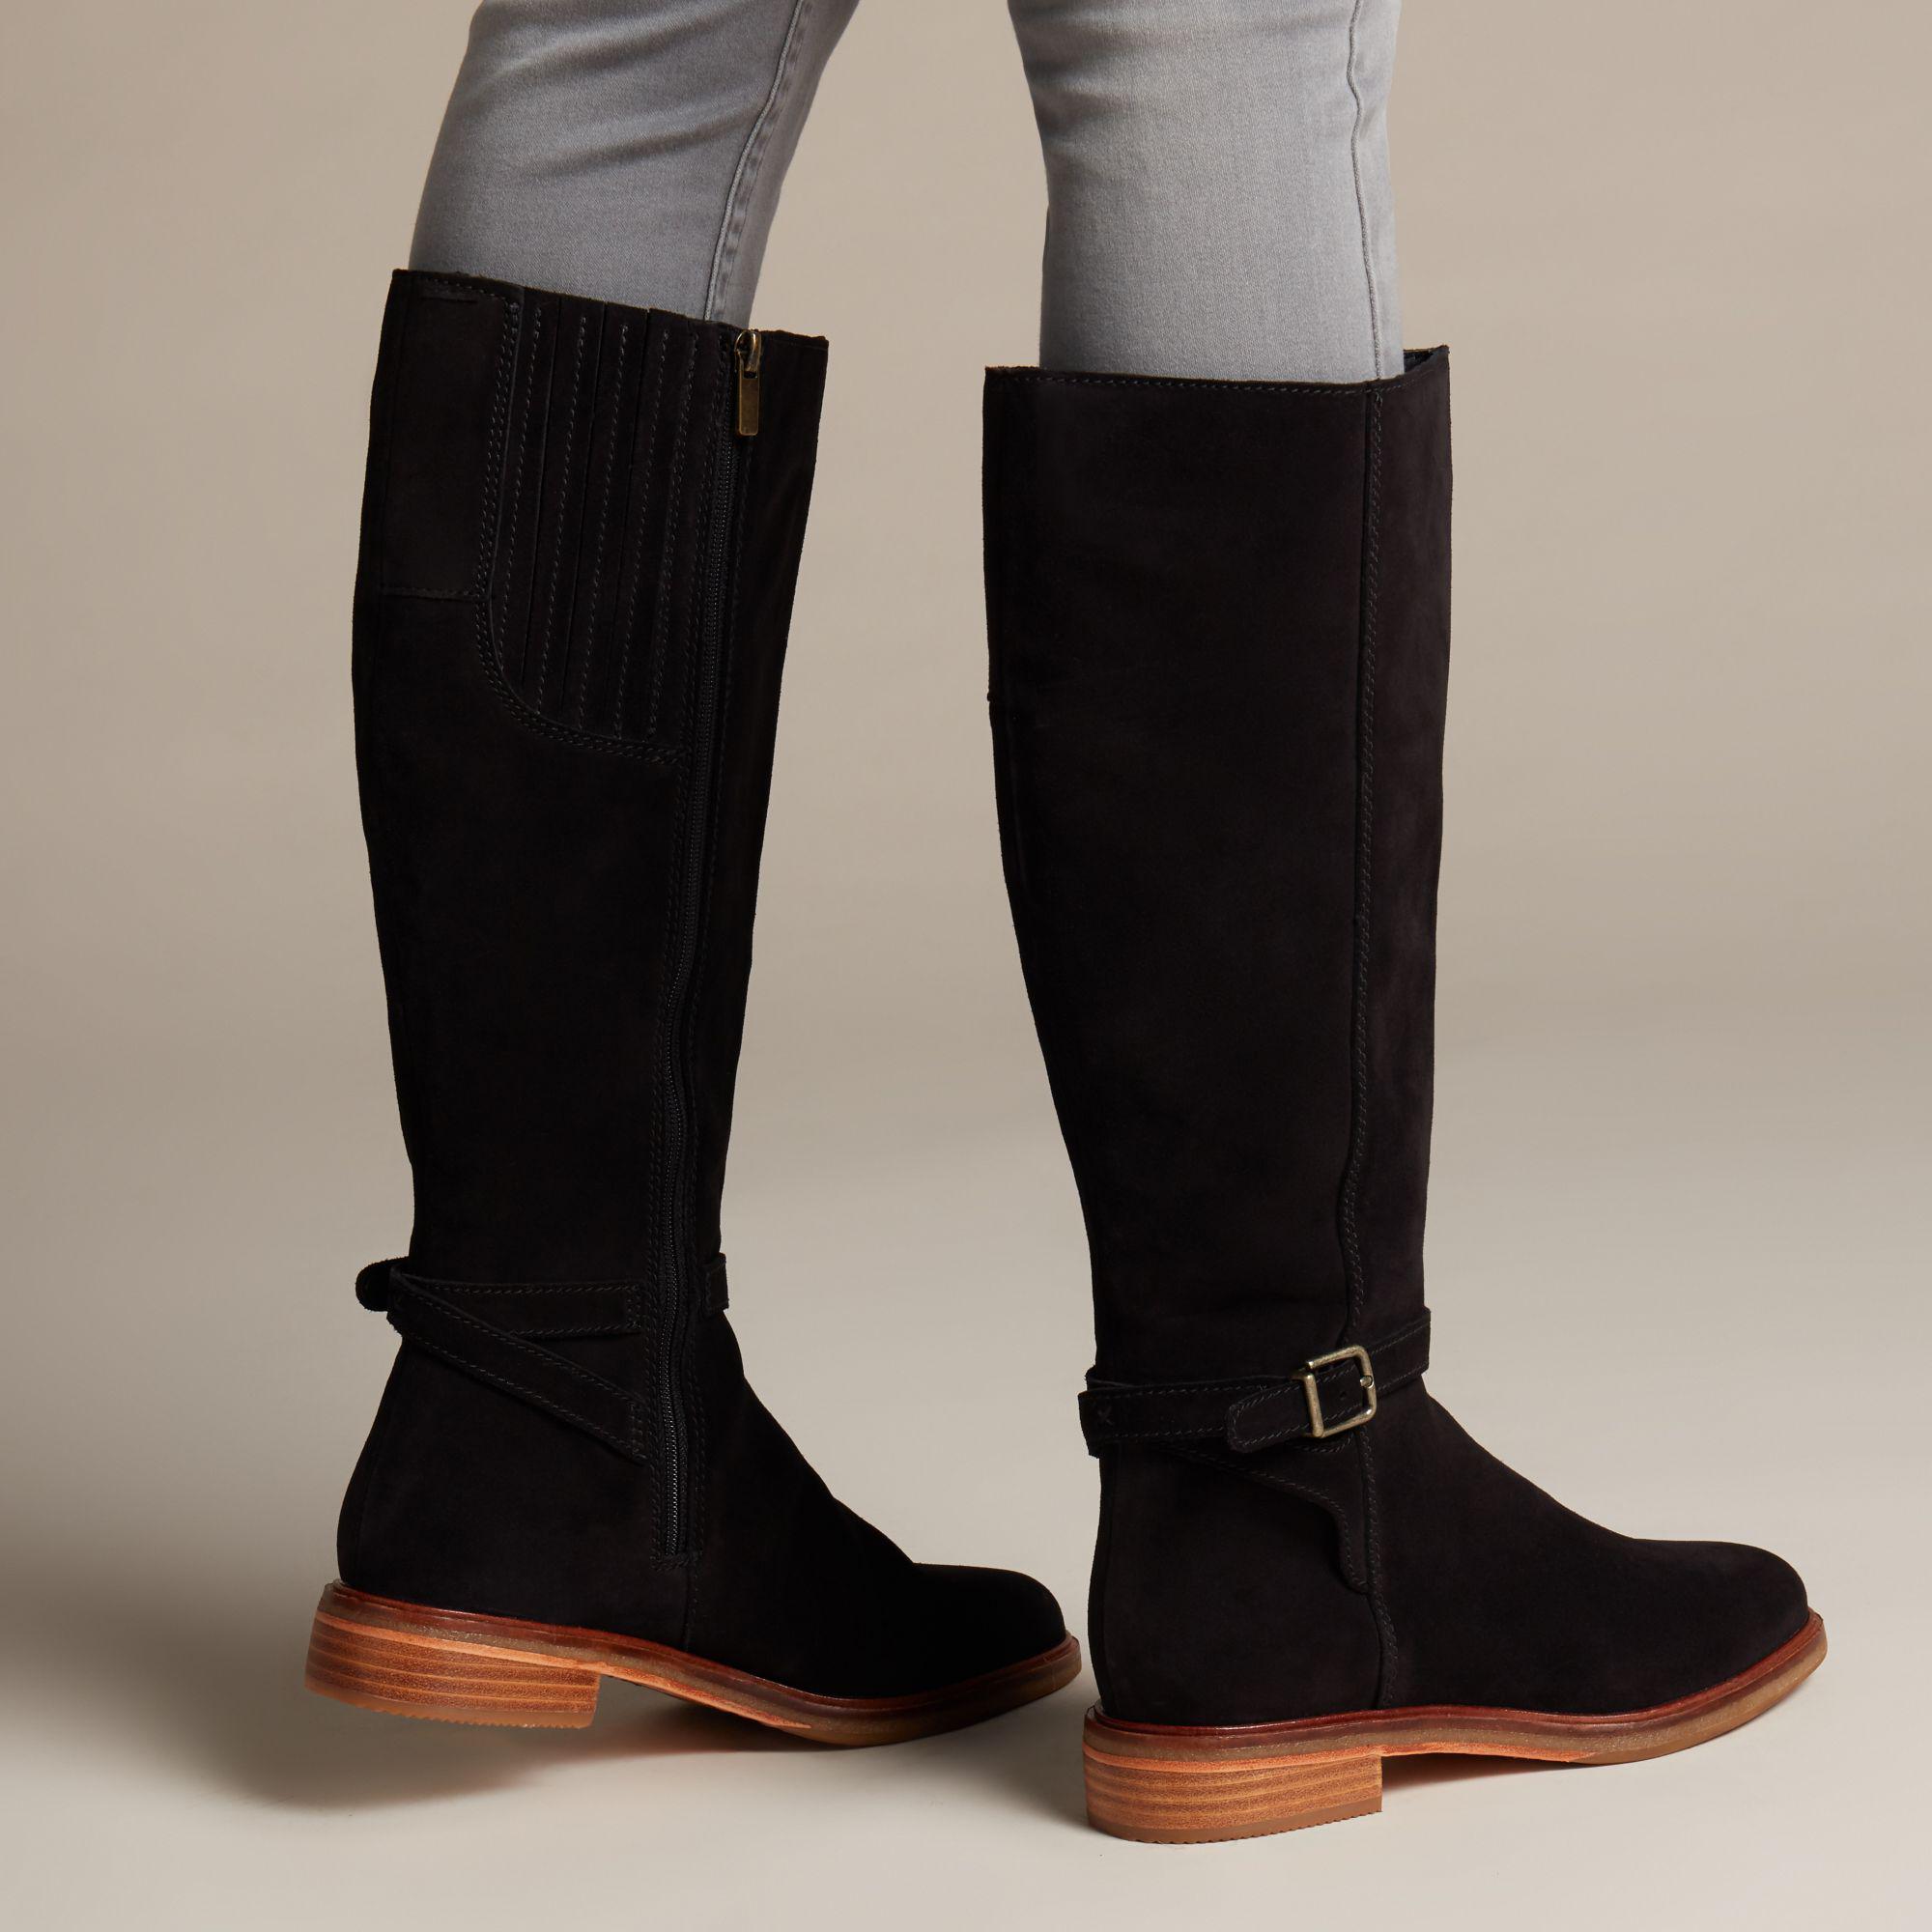 clarks clarkdale clad boot